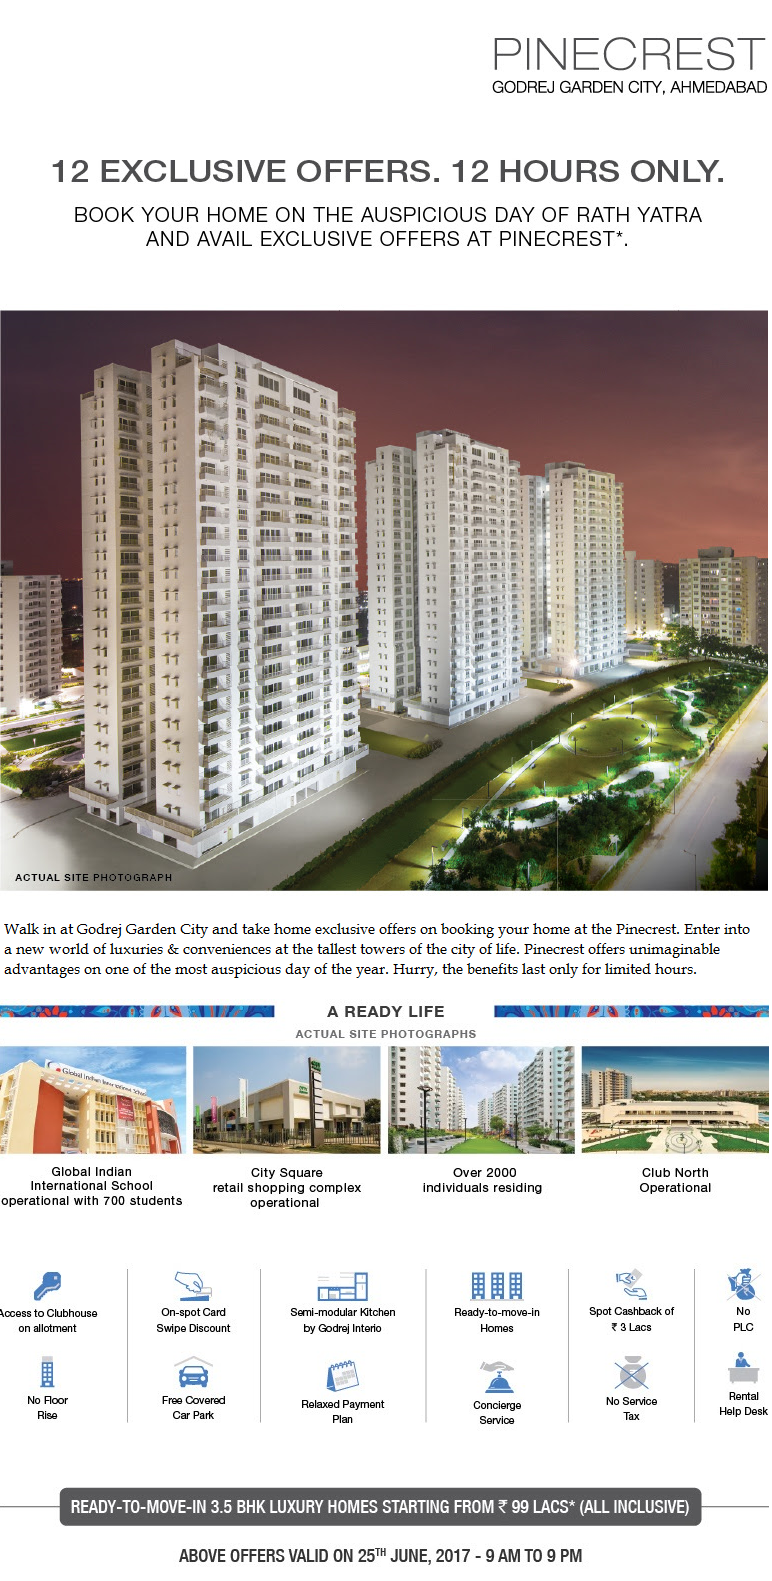 Walk in at Godrej Garden City and take home exclusive offers on booking your home at the Pinecrest Update